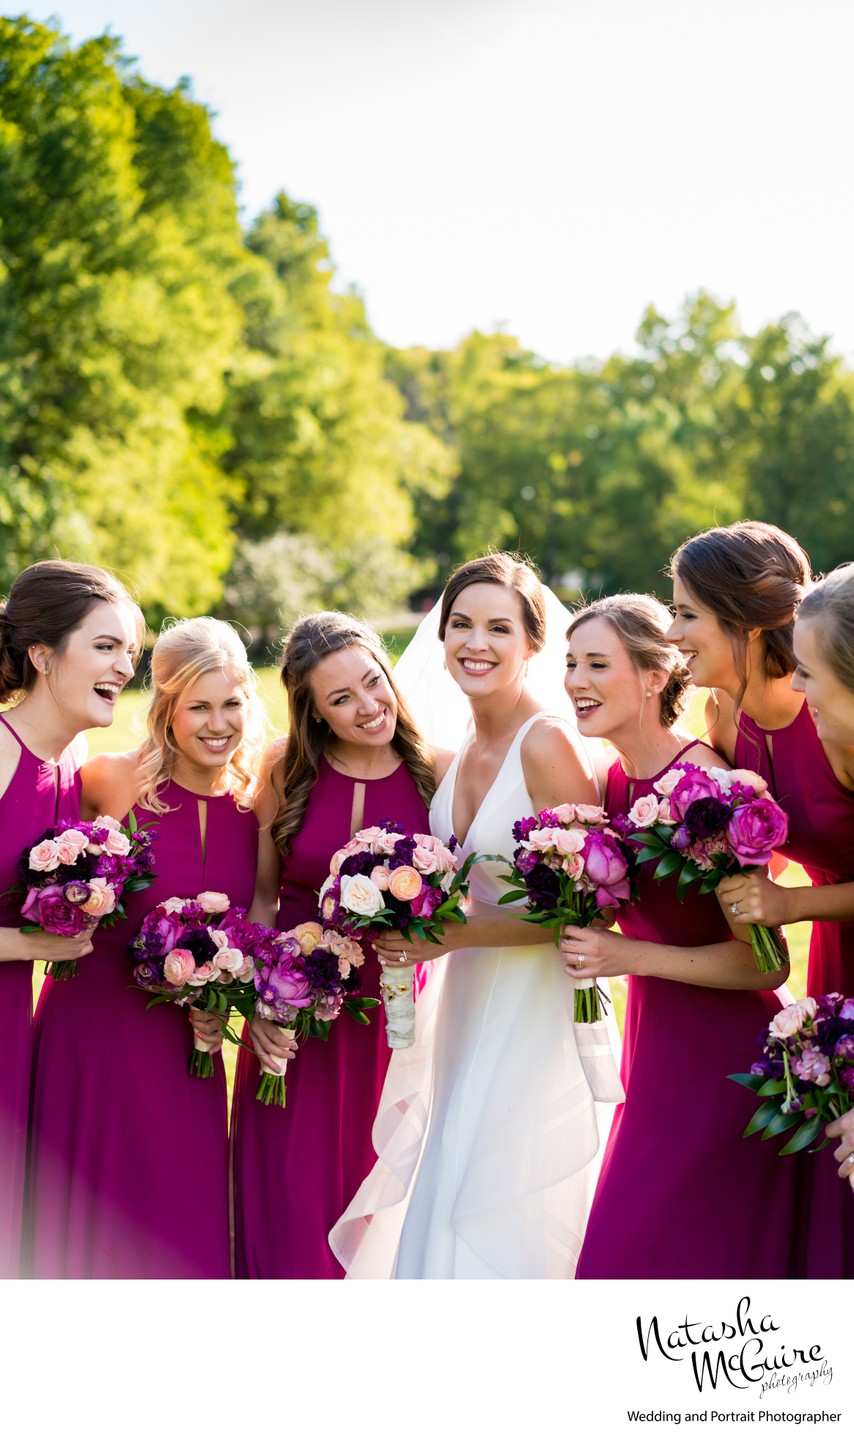 Candid photo of bride with bridesmaids outside